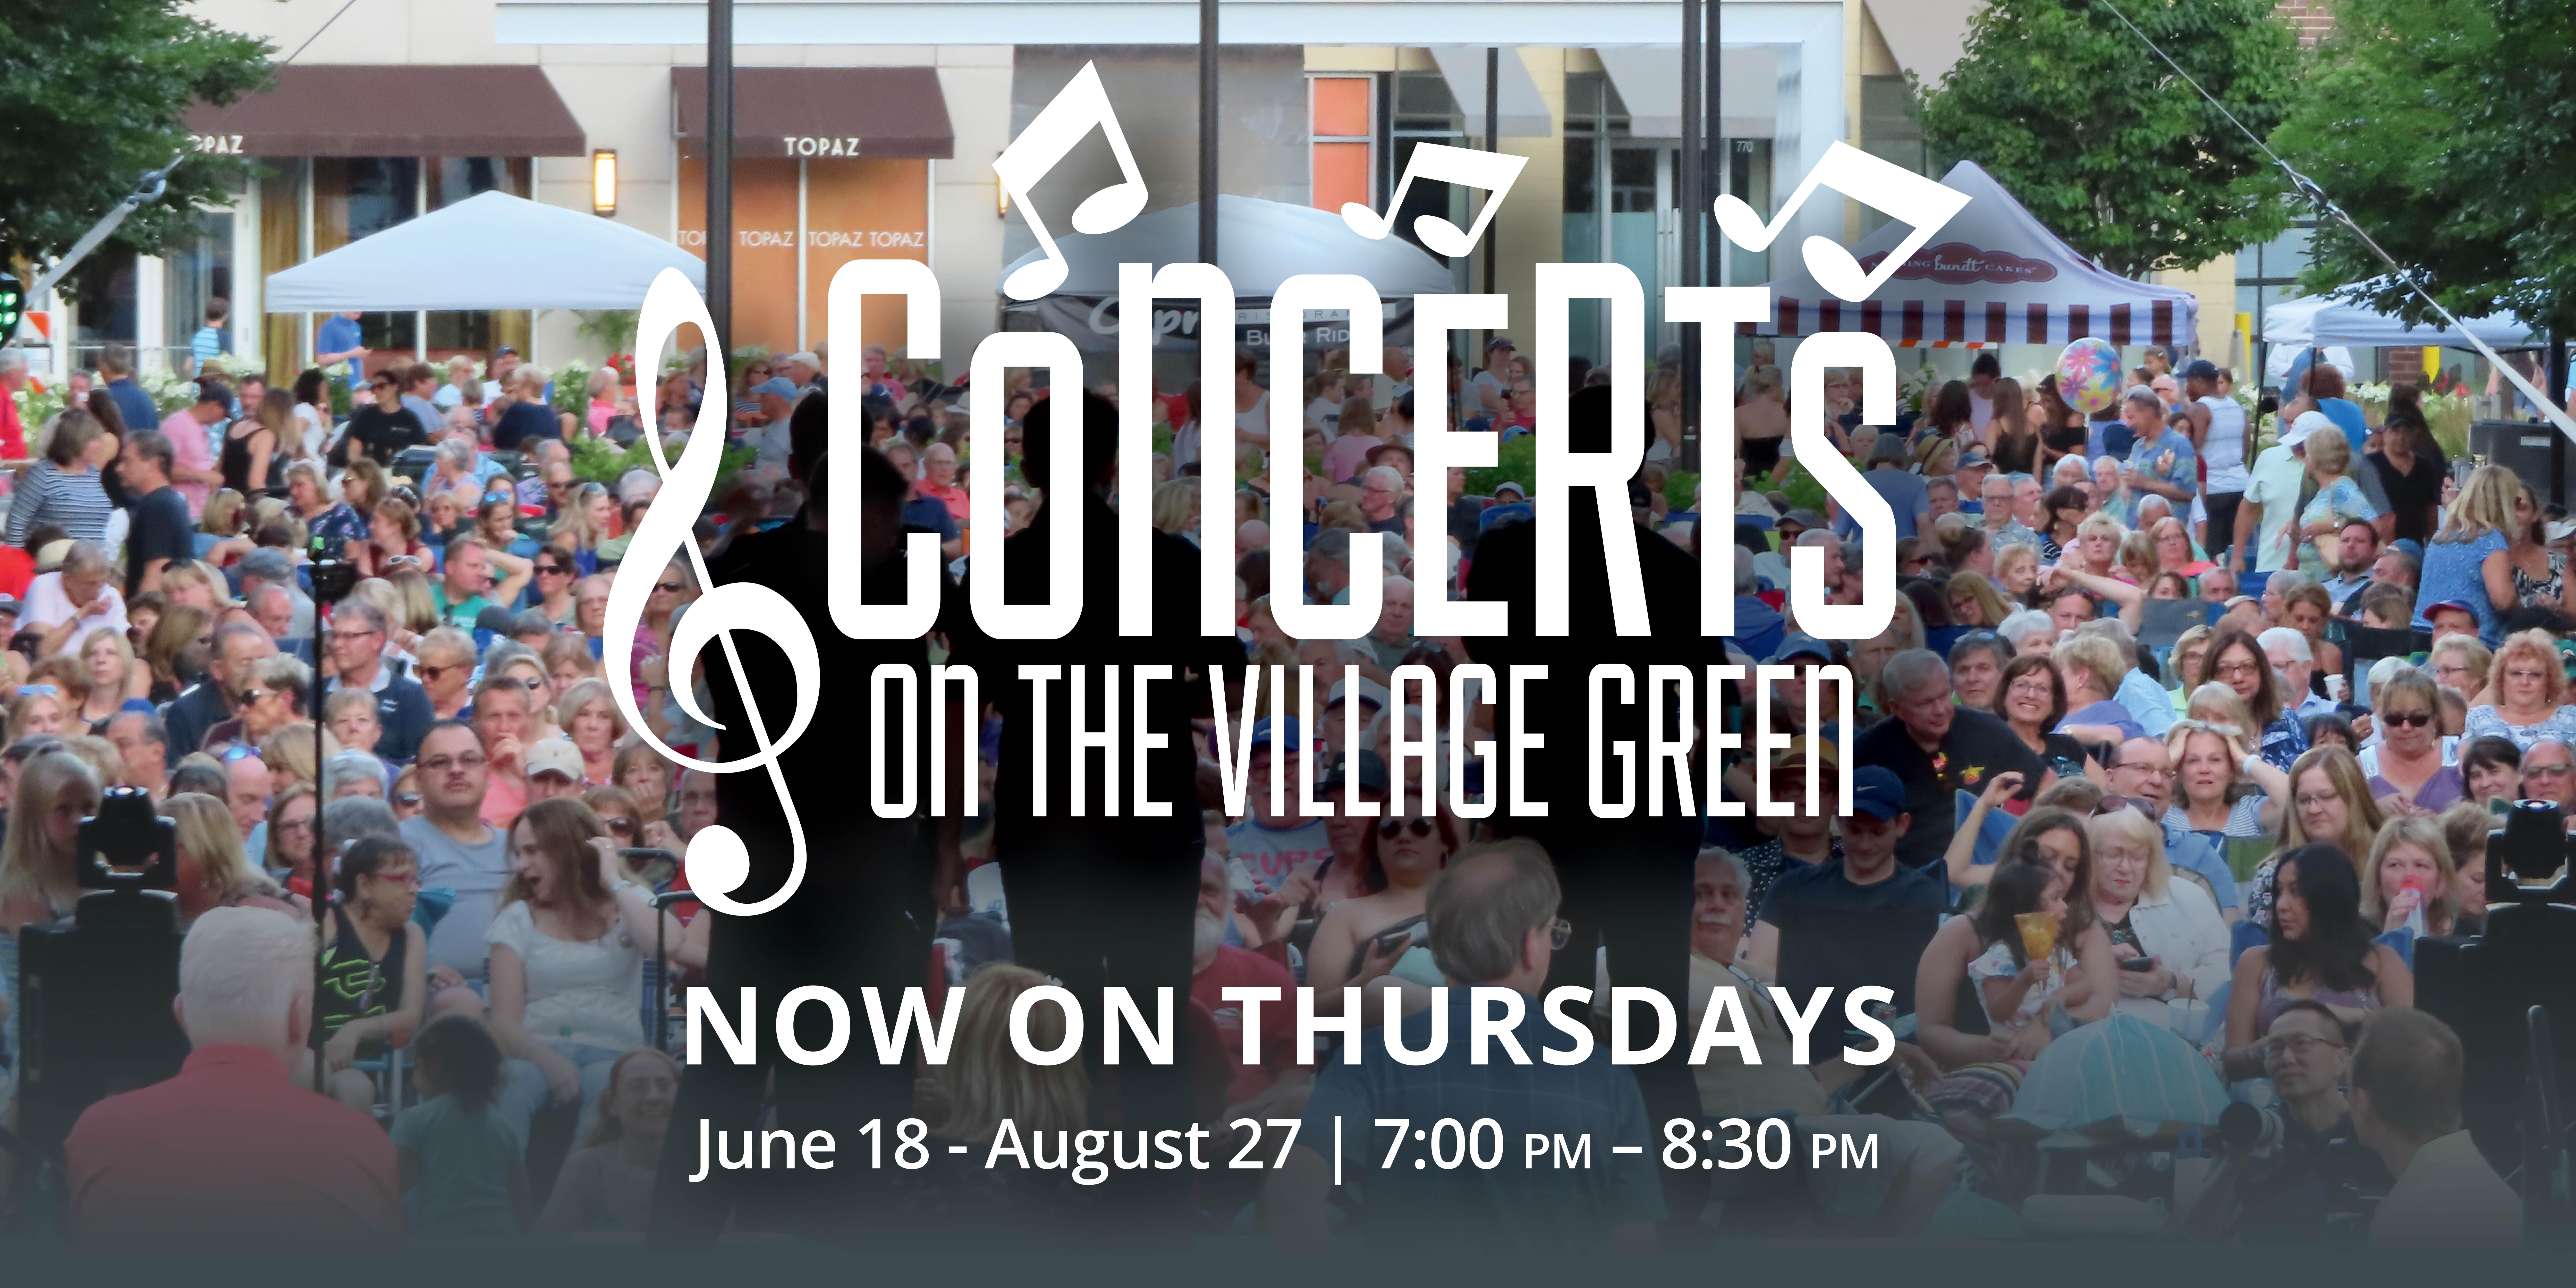 Concerts on The Village Green